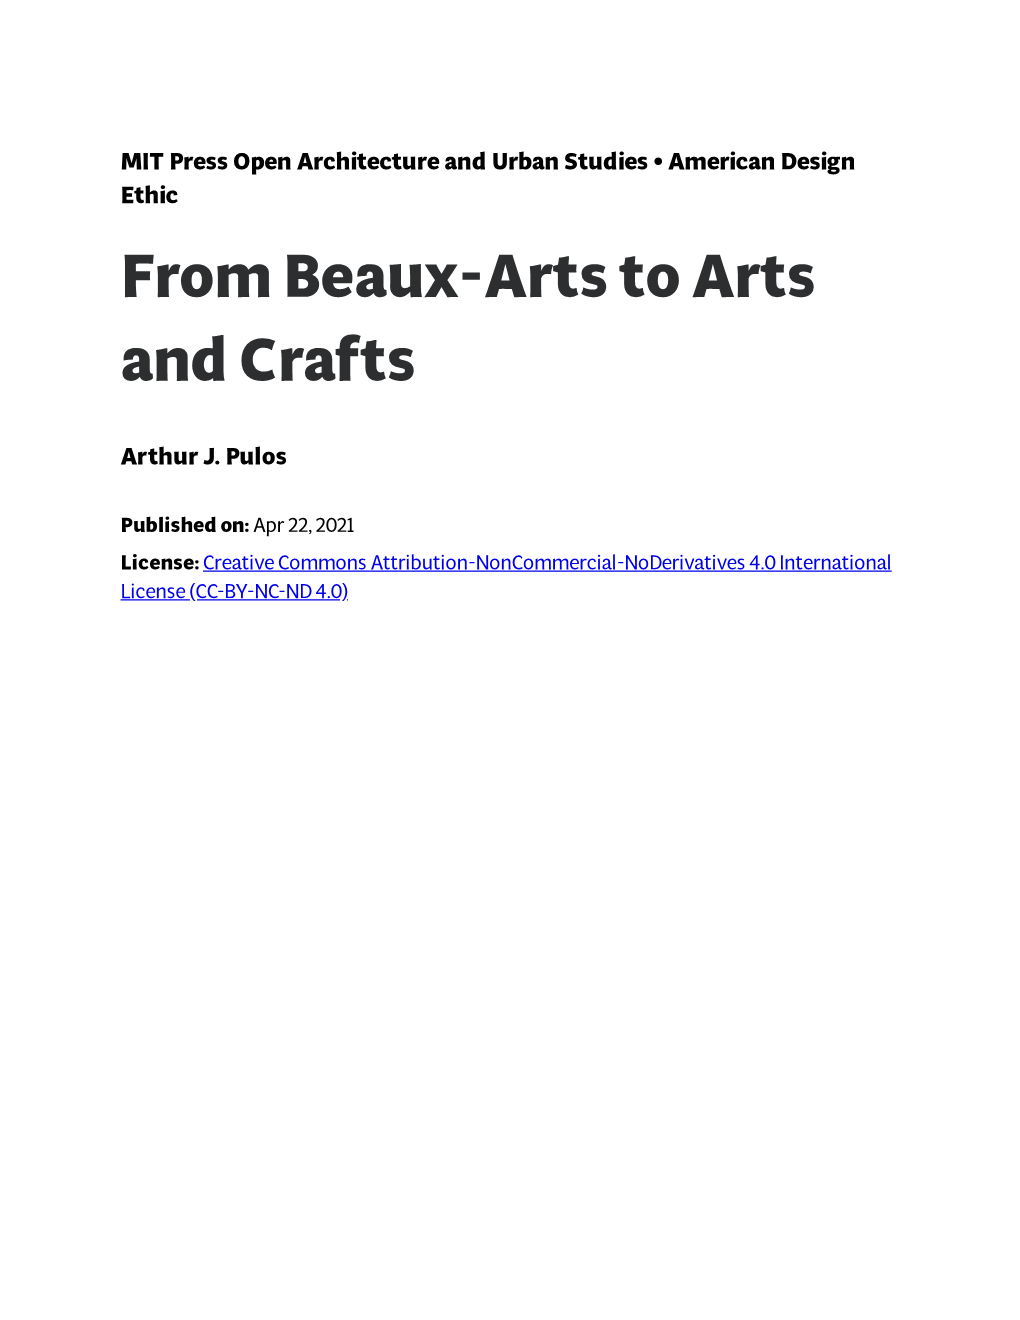 From Beaux-Arts to Arts and Crafts